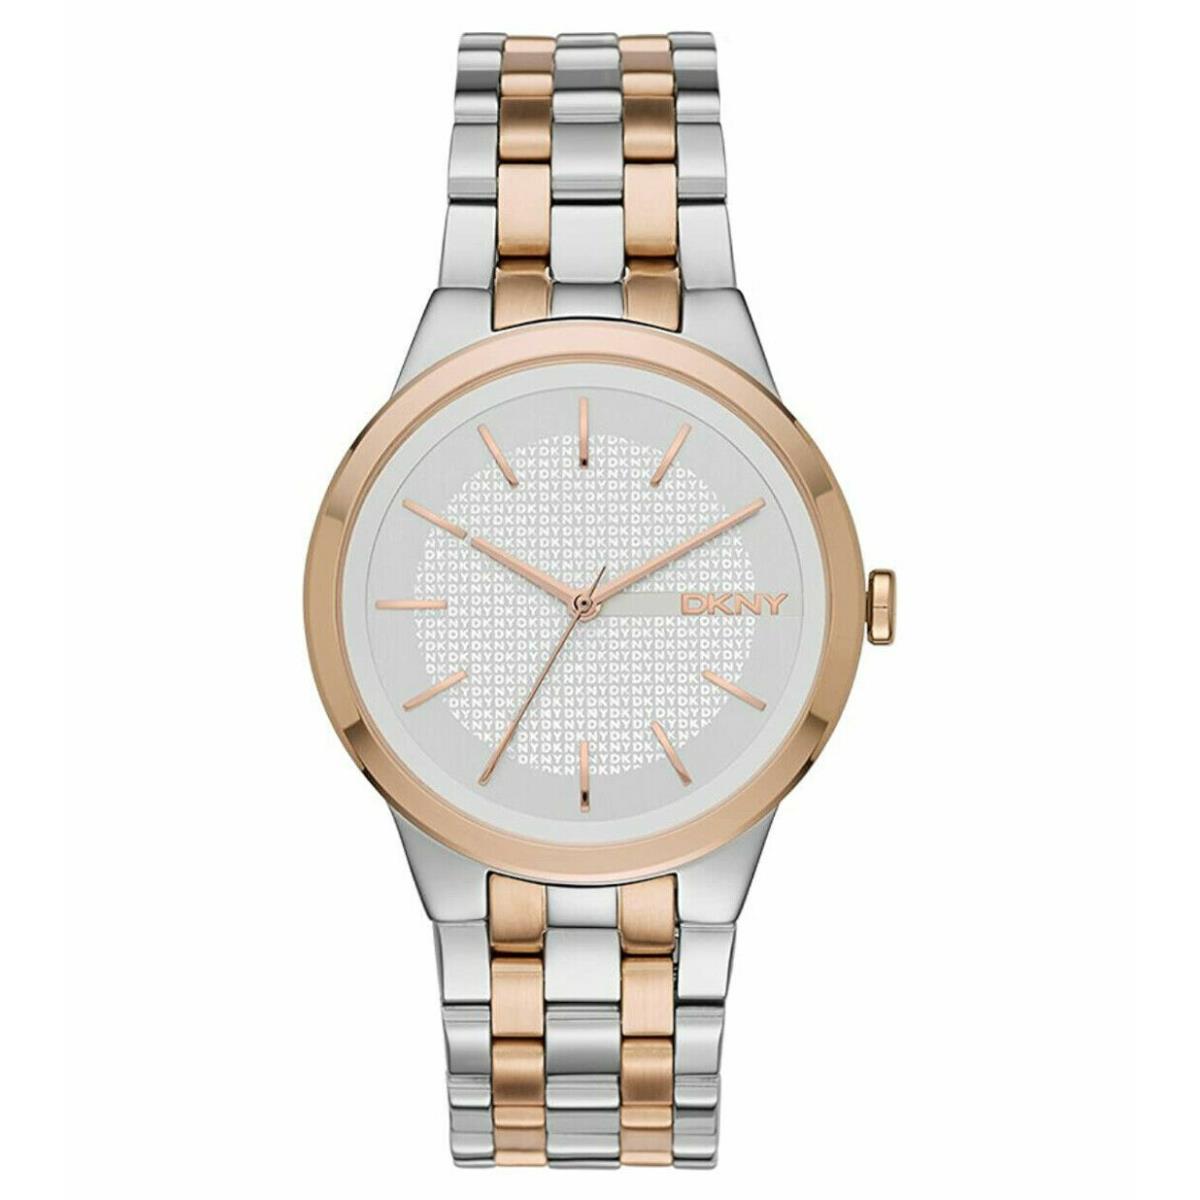 Dkny Women`s `park Slope` Quartz Stainless Steel Casual Watch Model: NY2464 -new